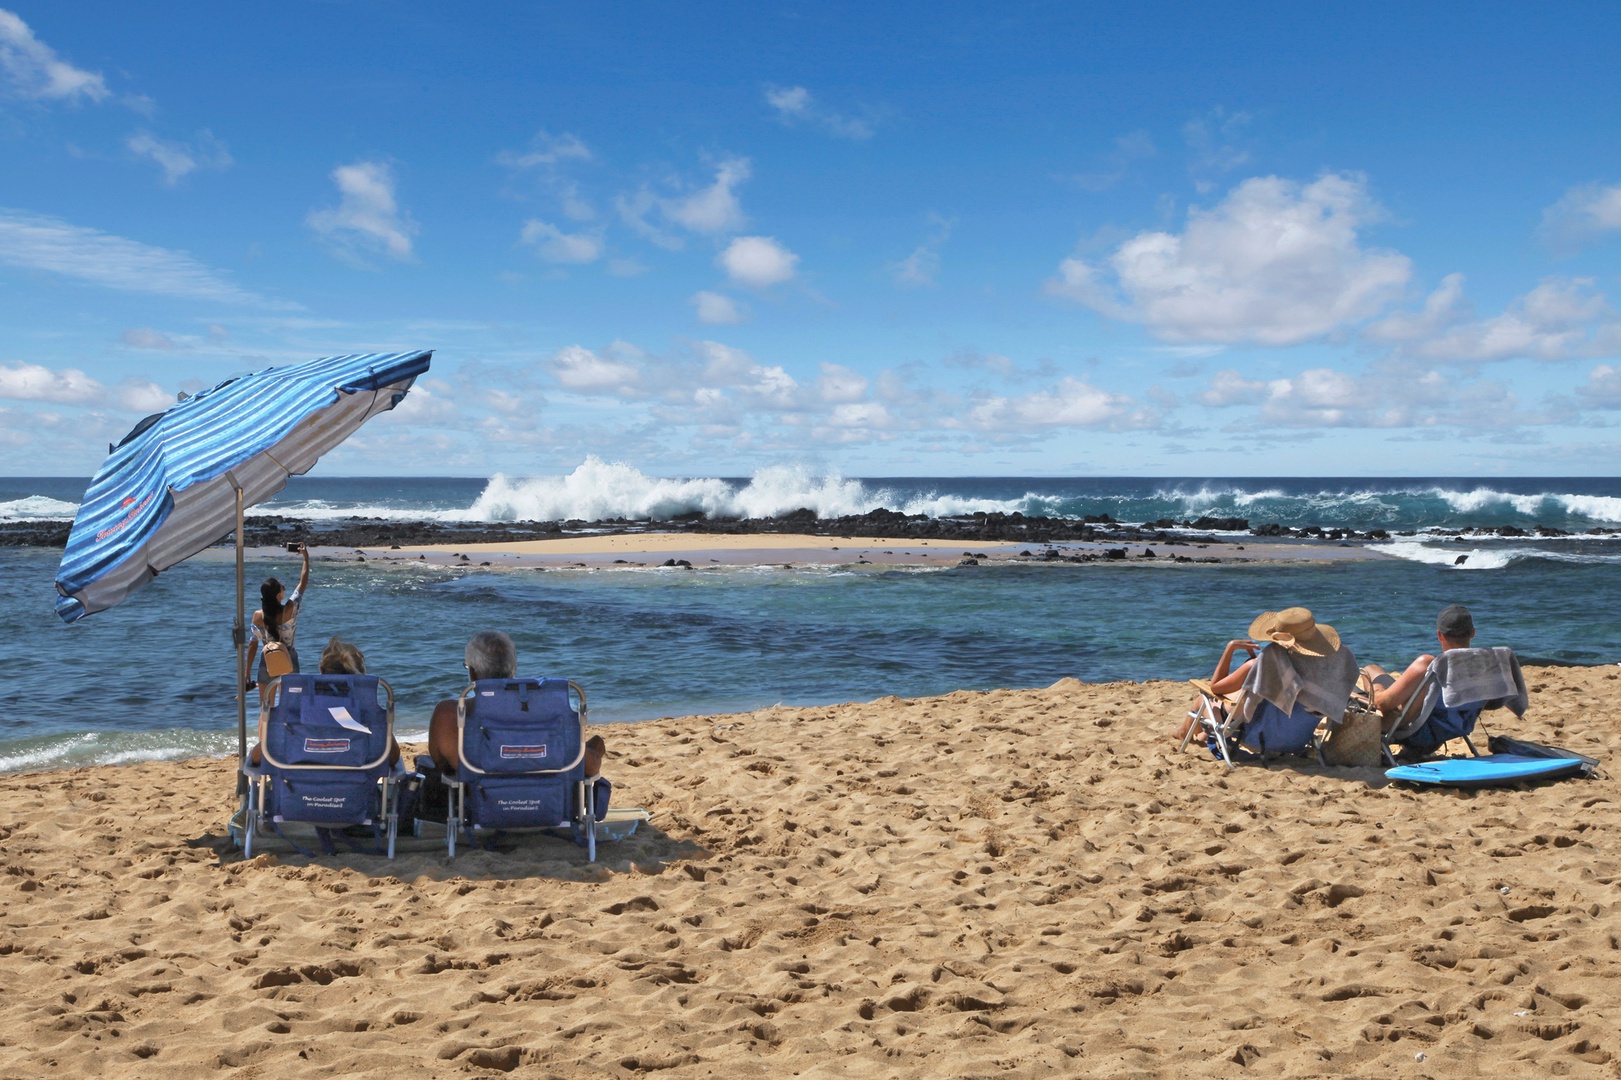 Koloa Vacation Rentals, Hale Makau - Relax in the sun and listen to the ocean waves at Poipu Beach Park.